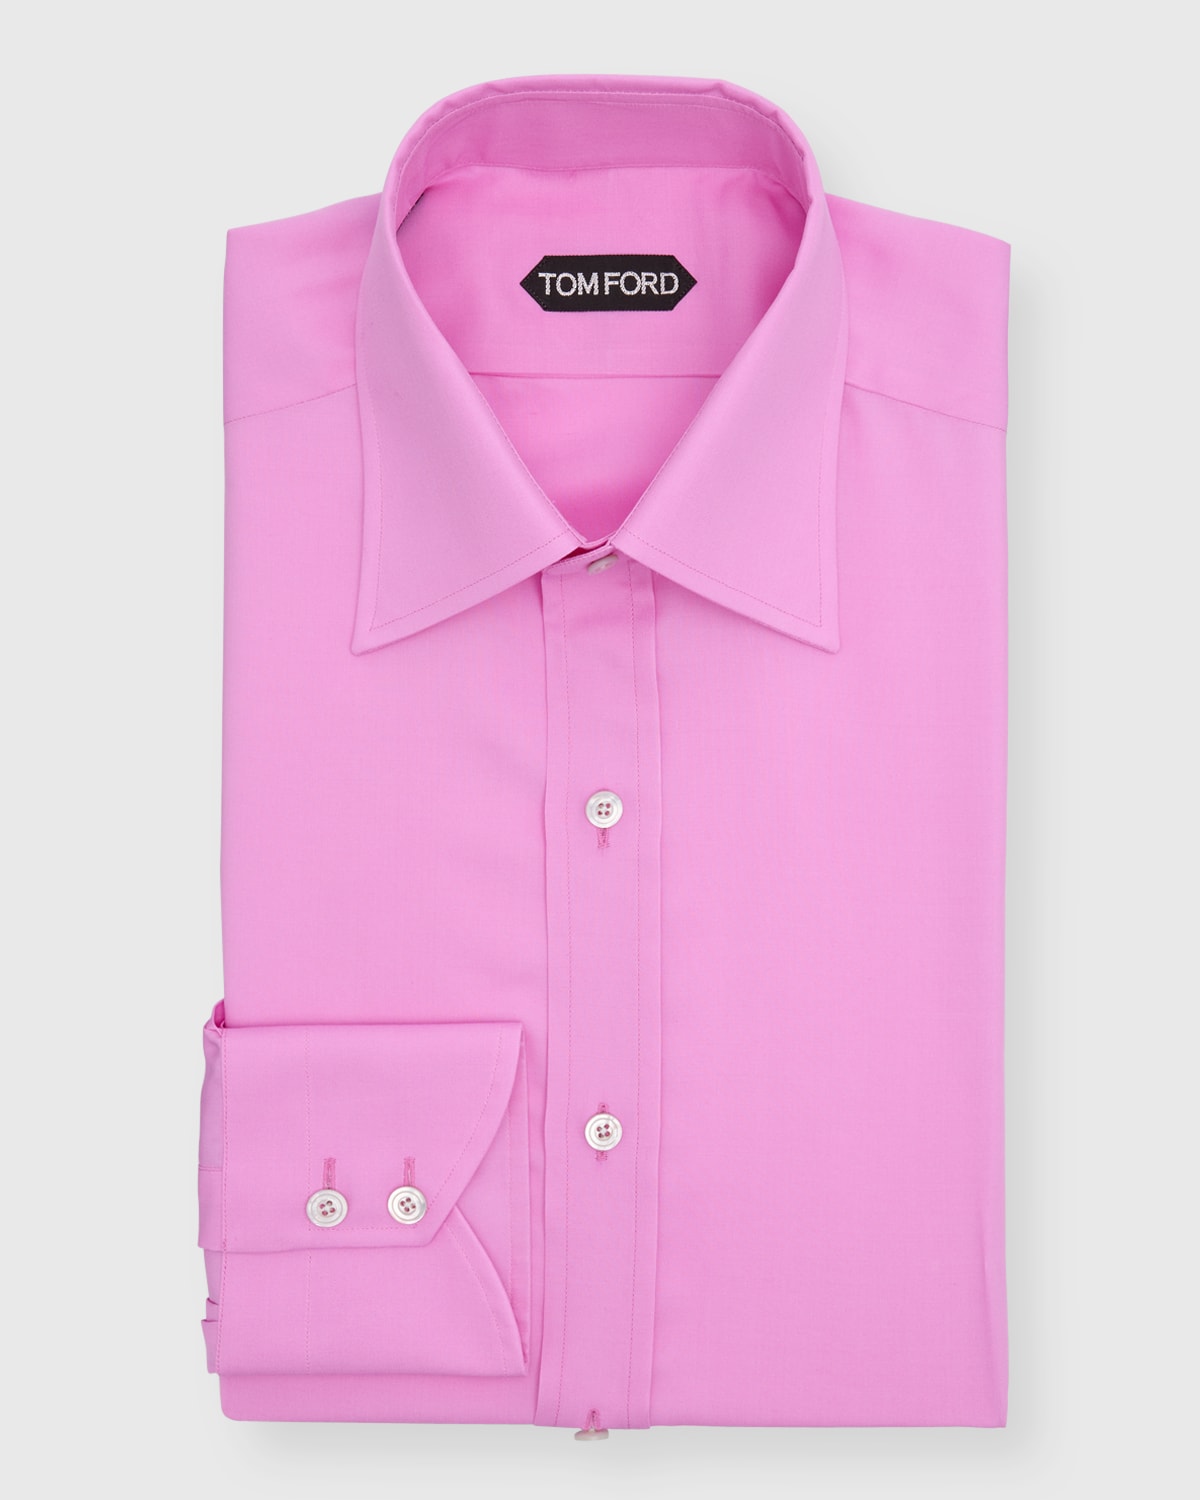 Tom Ford Men's Cotton Slim Fit Dress Shirt In Orchid